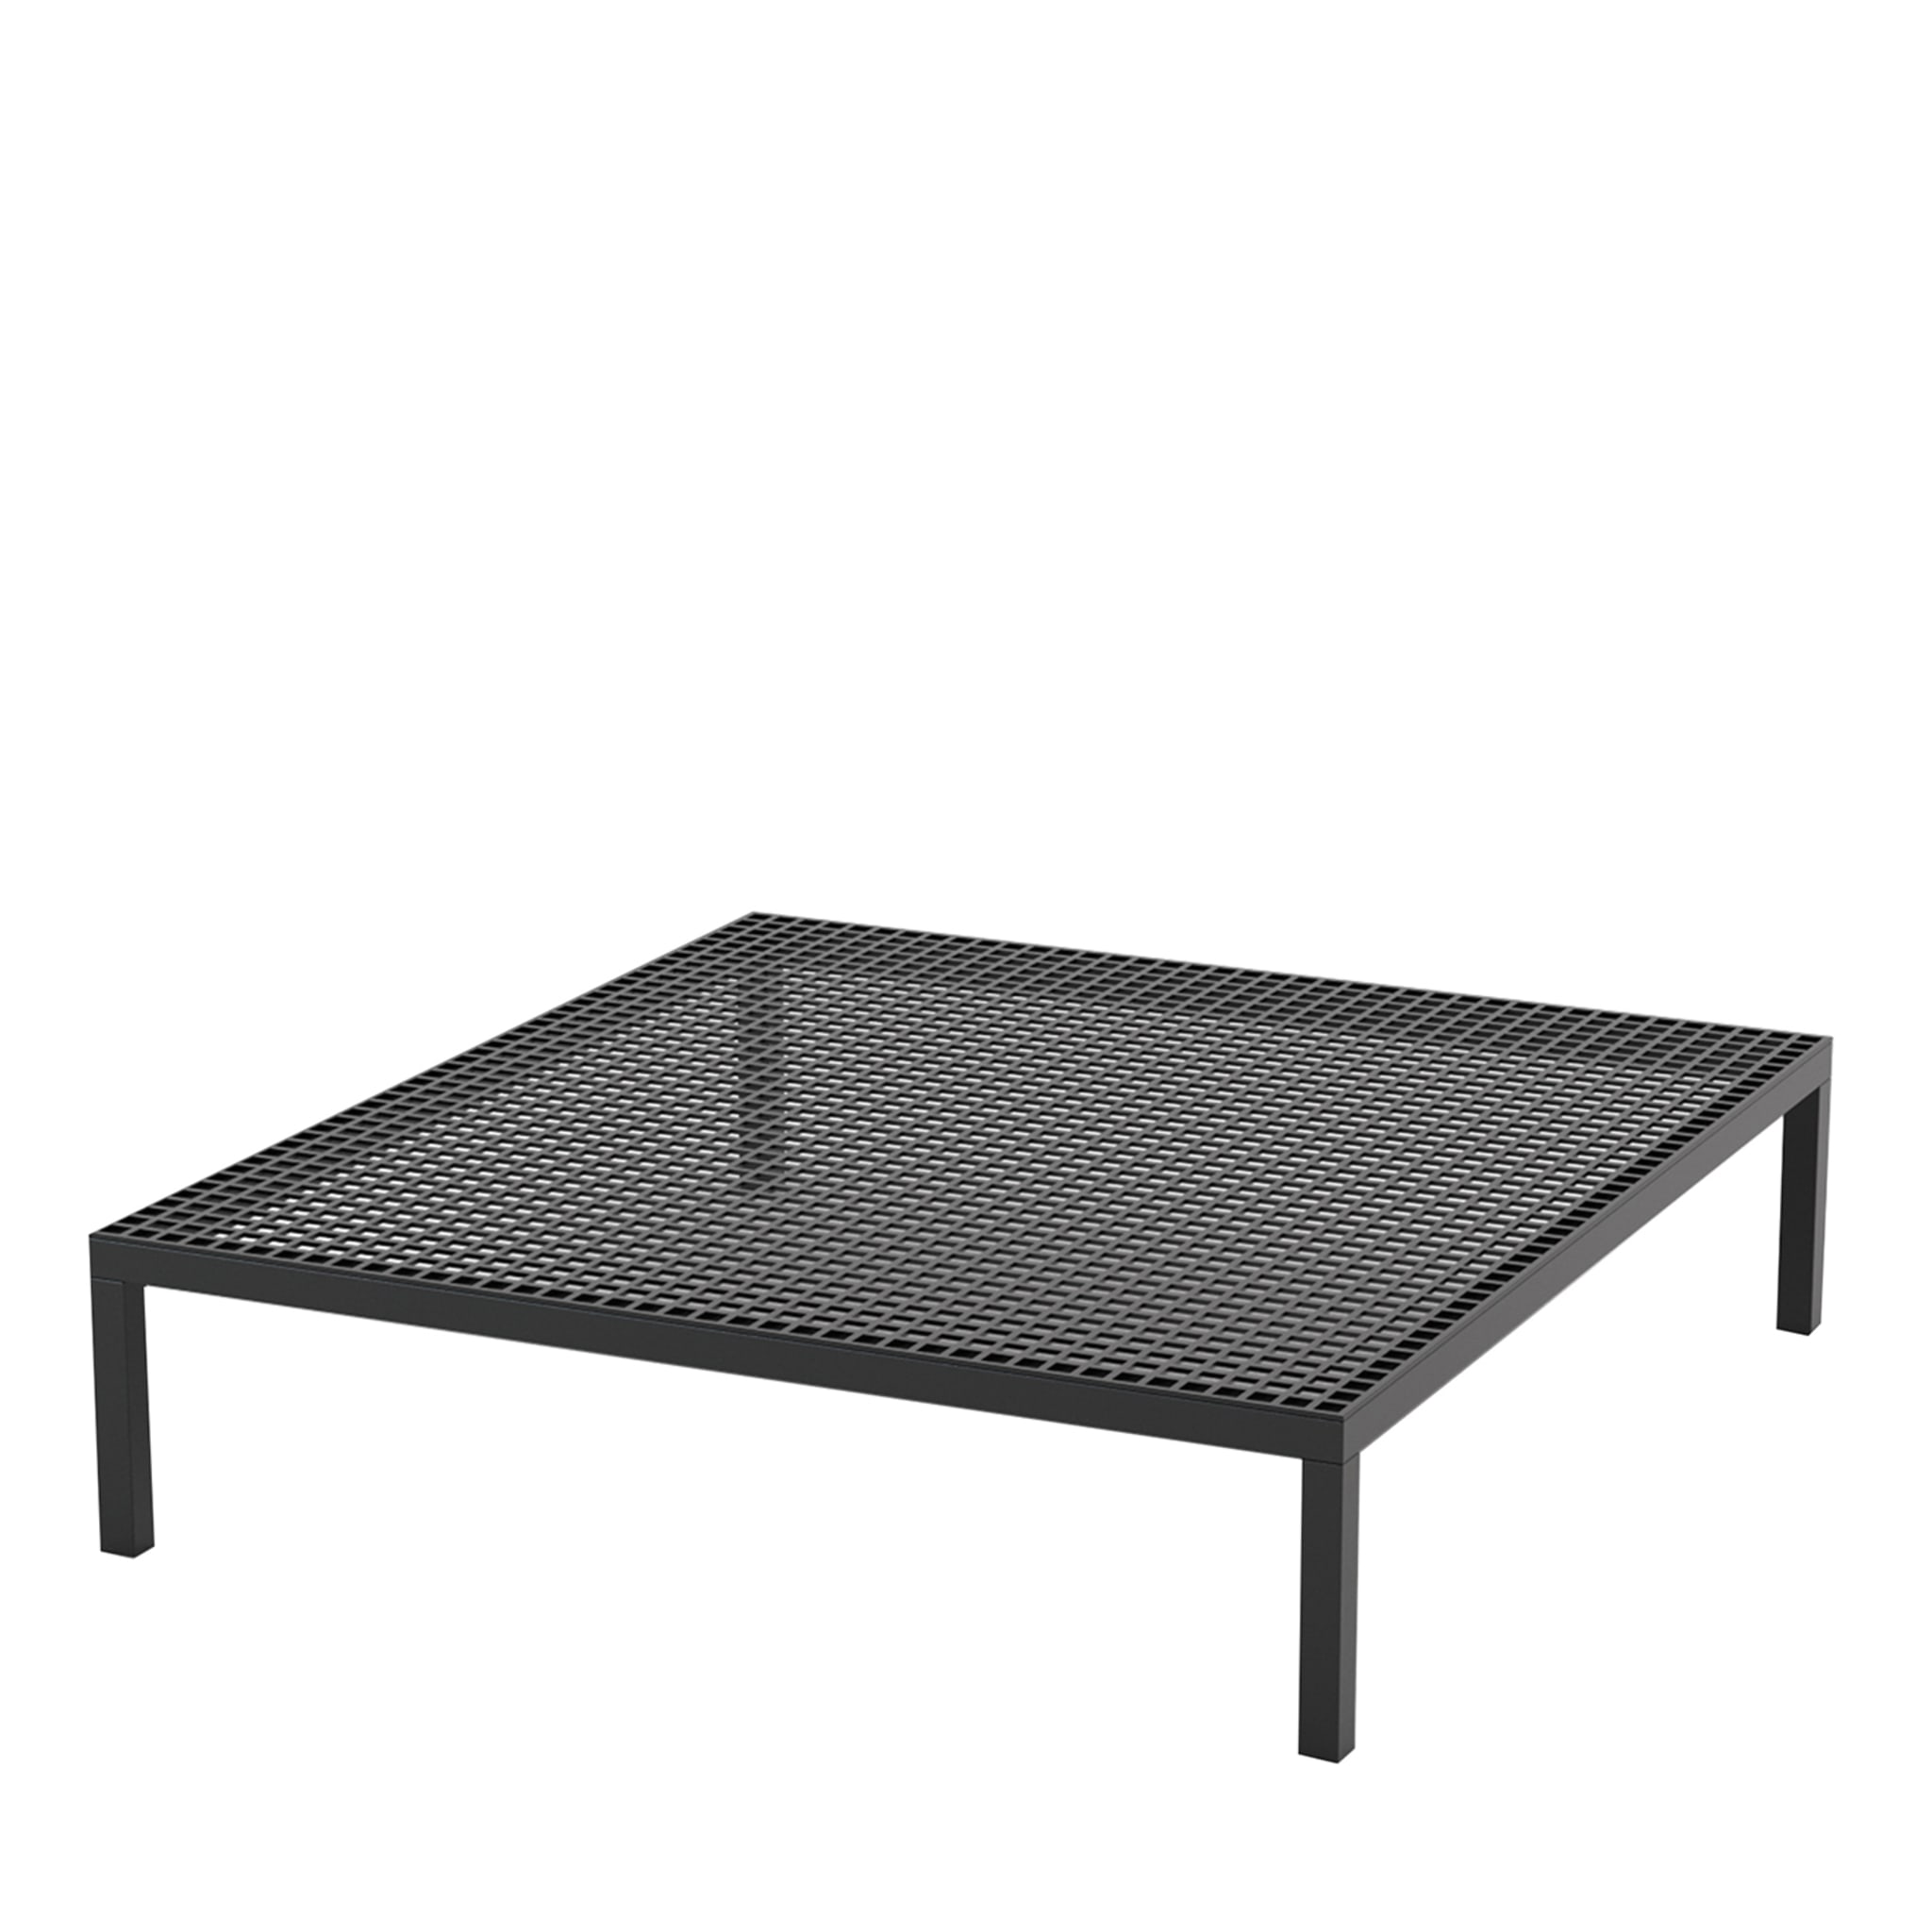 Zenit Square Black Coffee Table - Main view